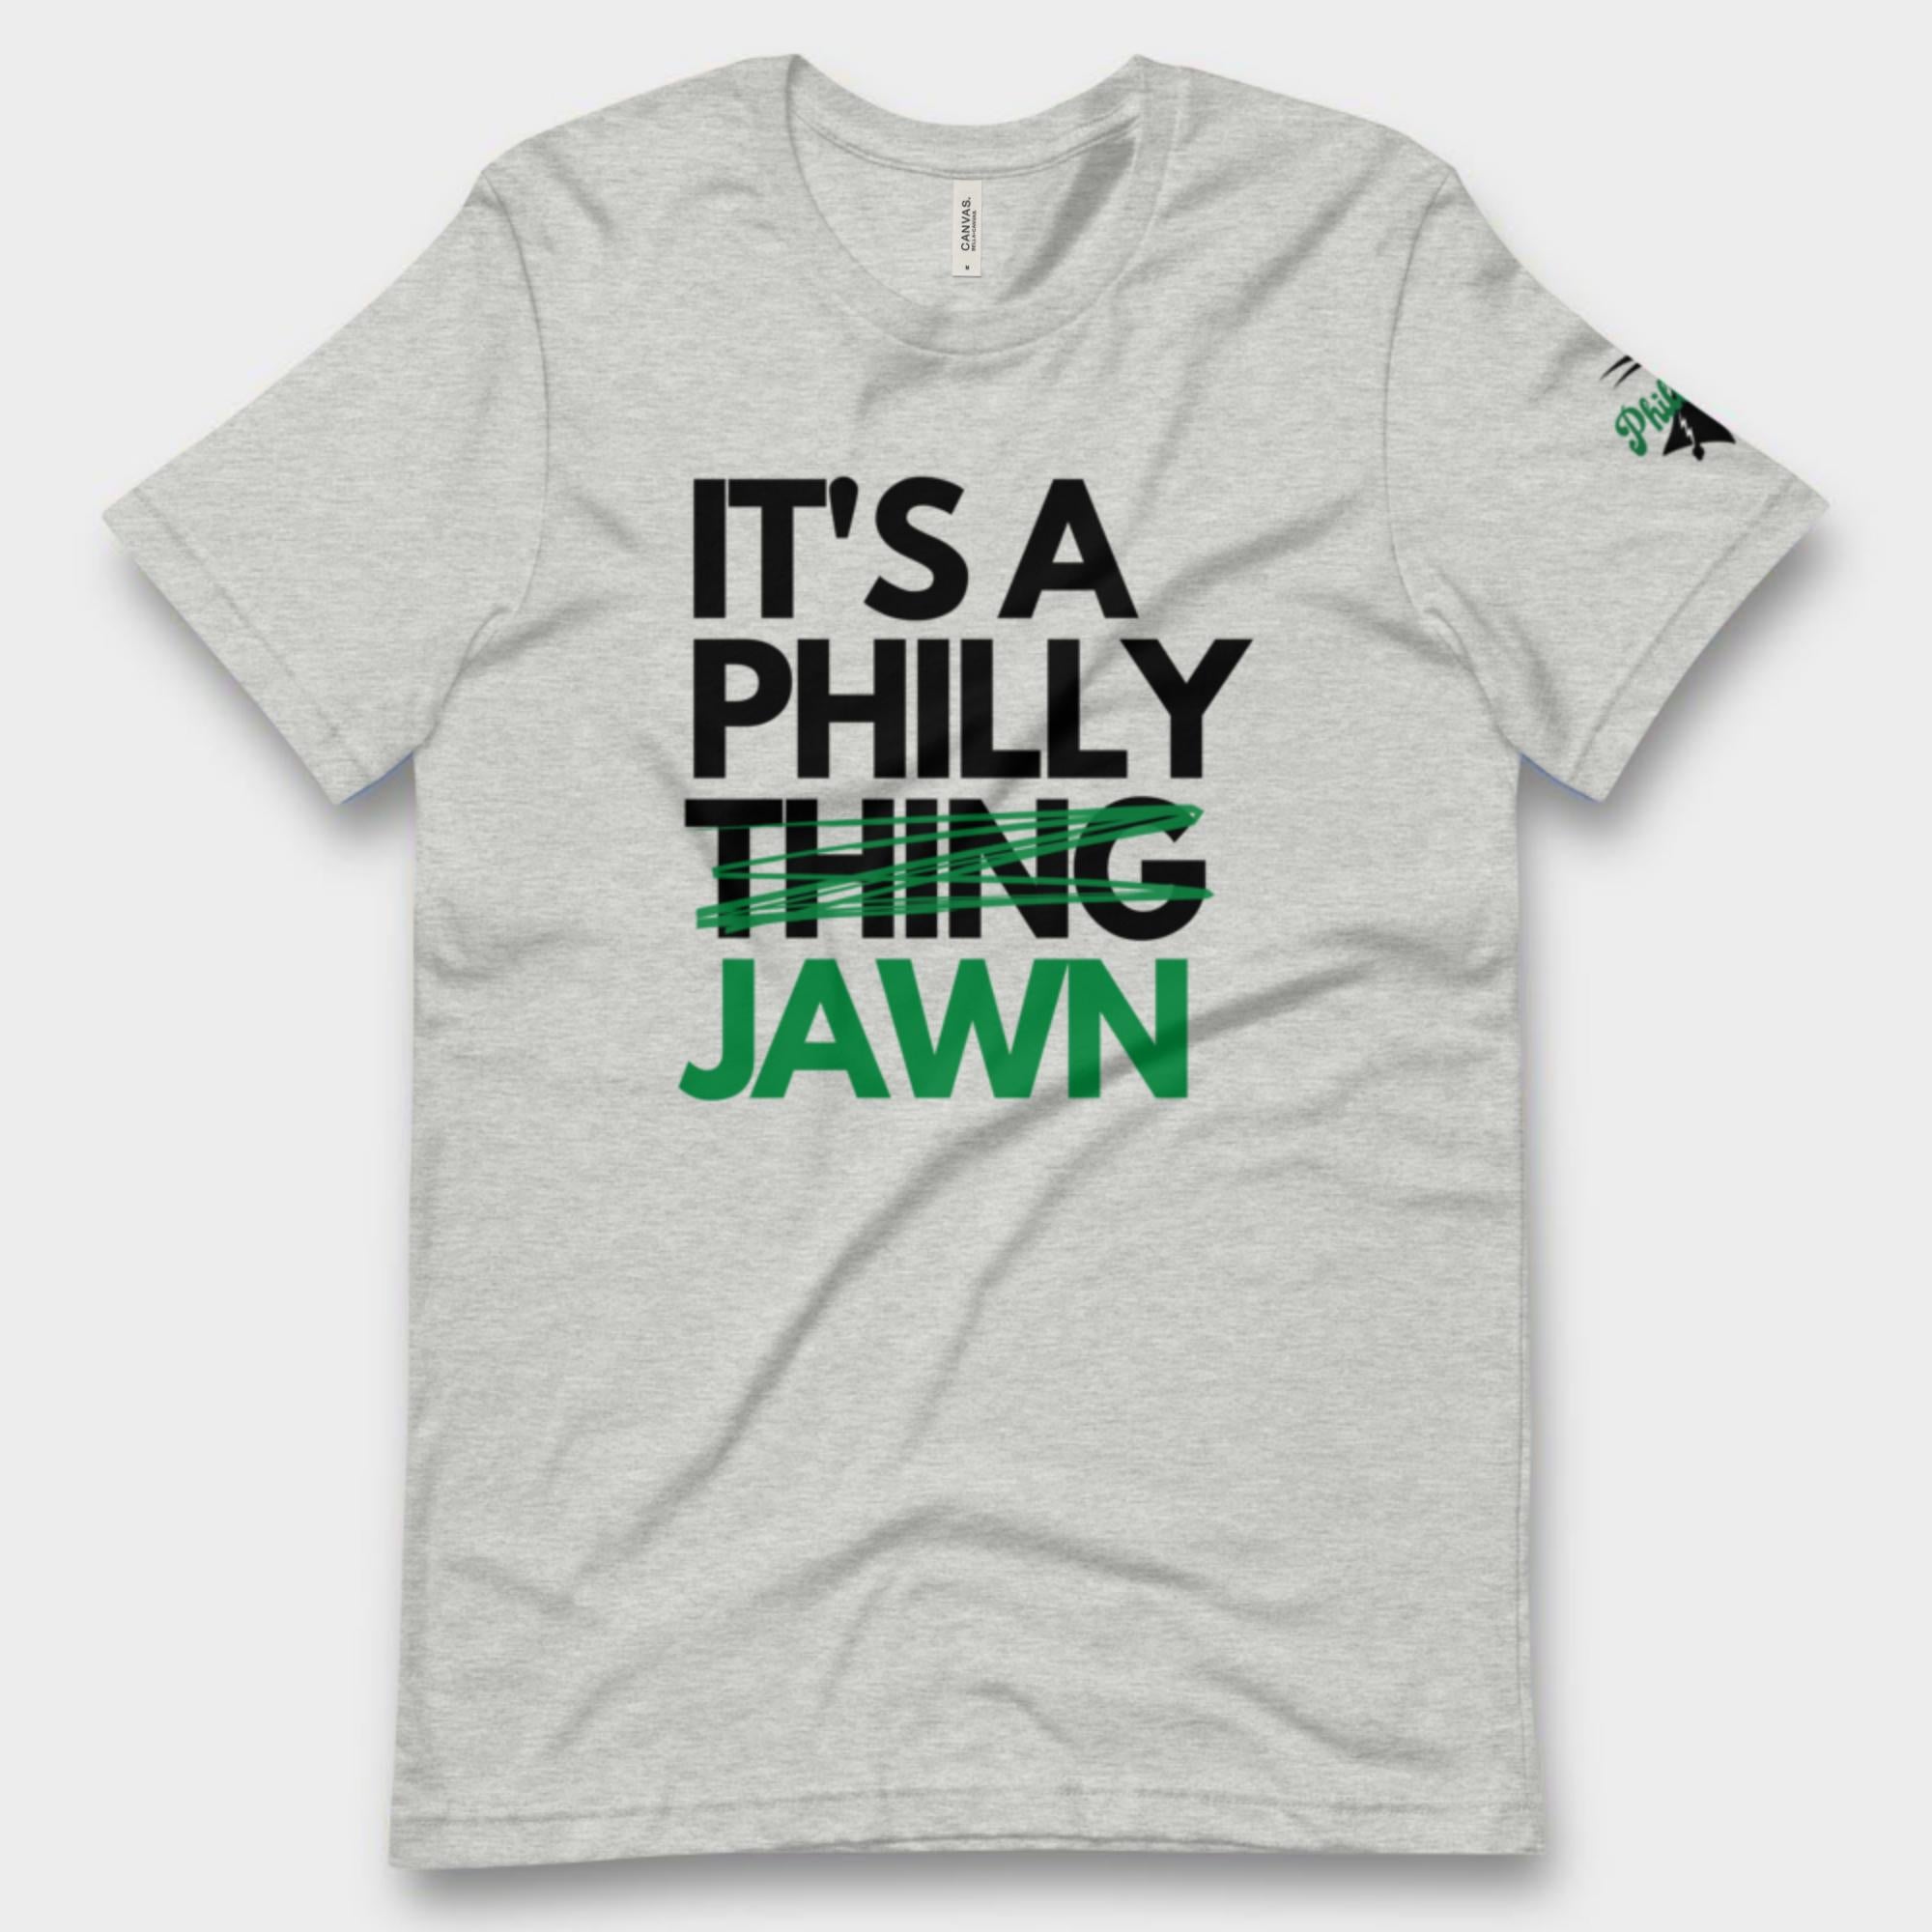 "It's a Philly Jawn" Tee